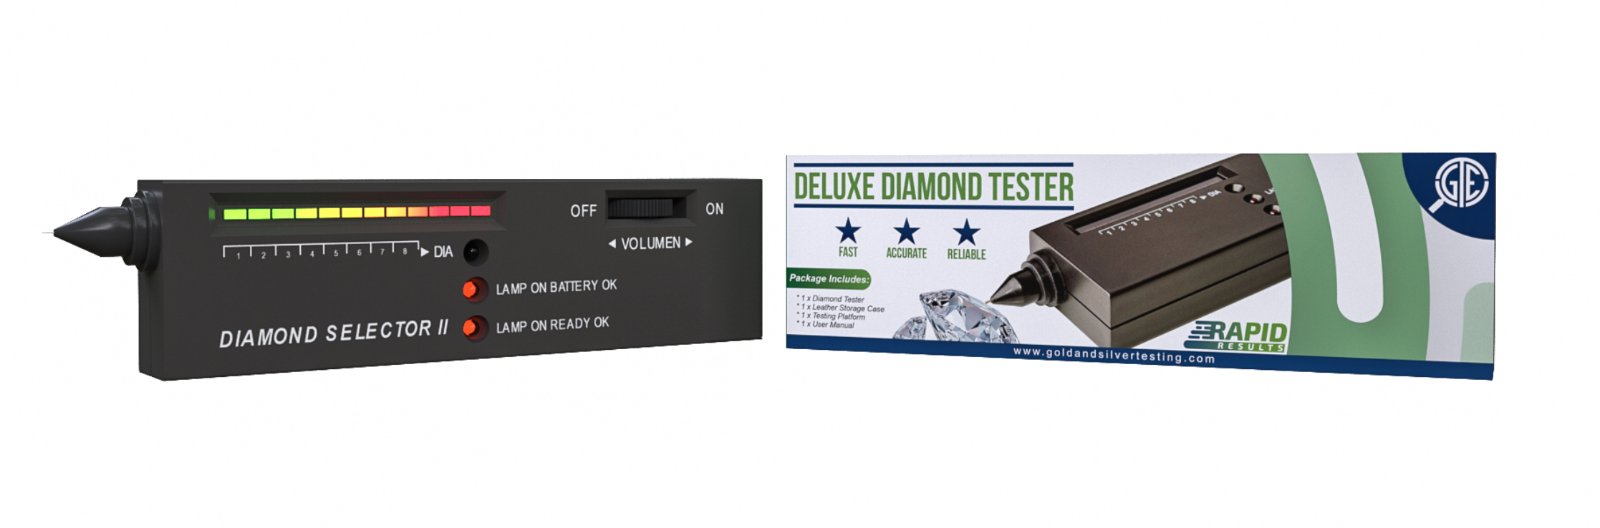 Are Diamond Testers Accurate?